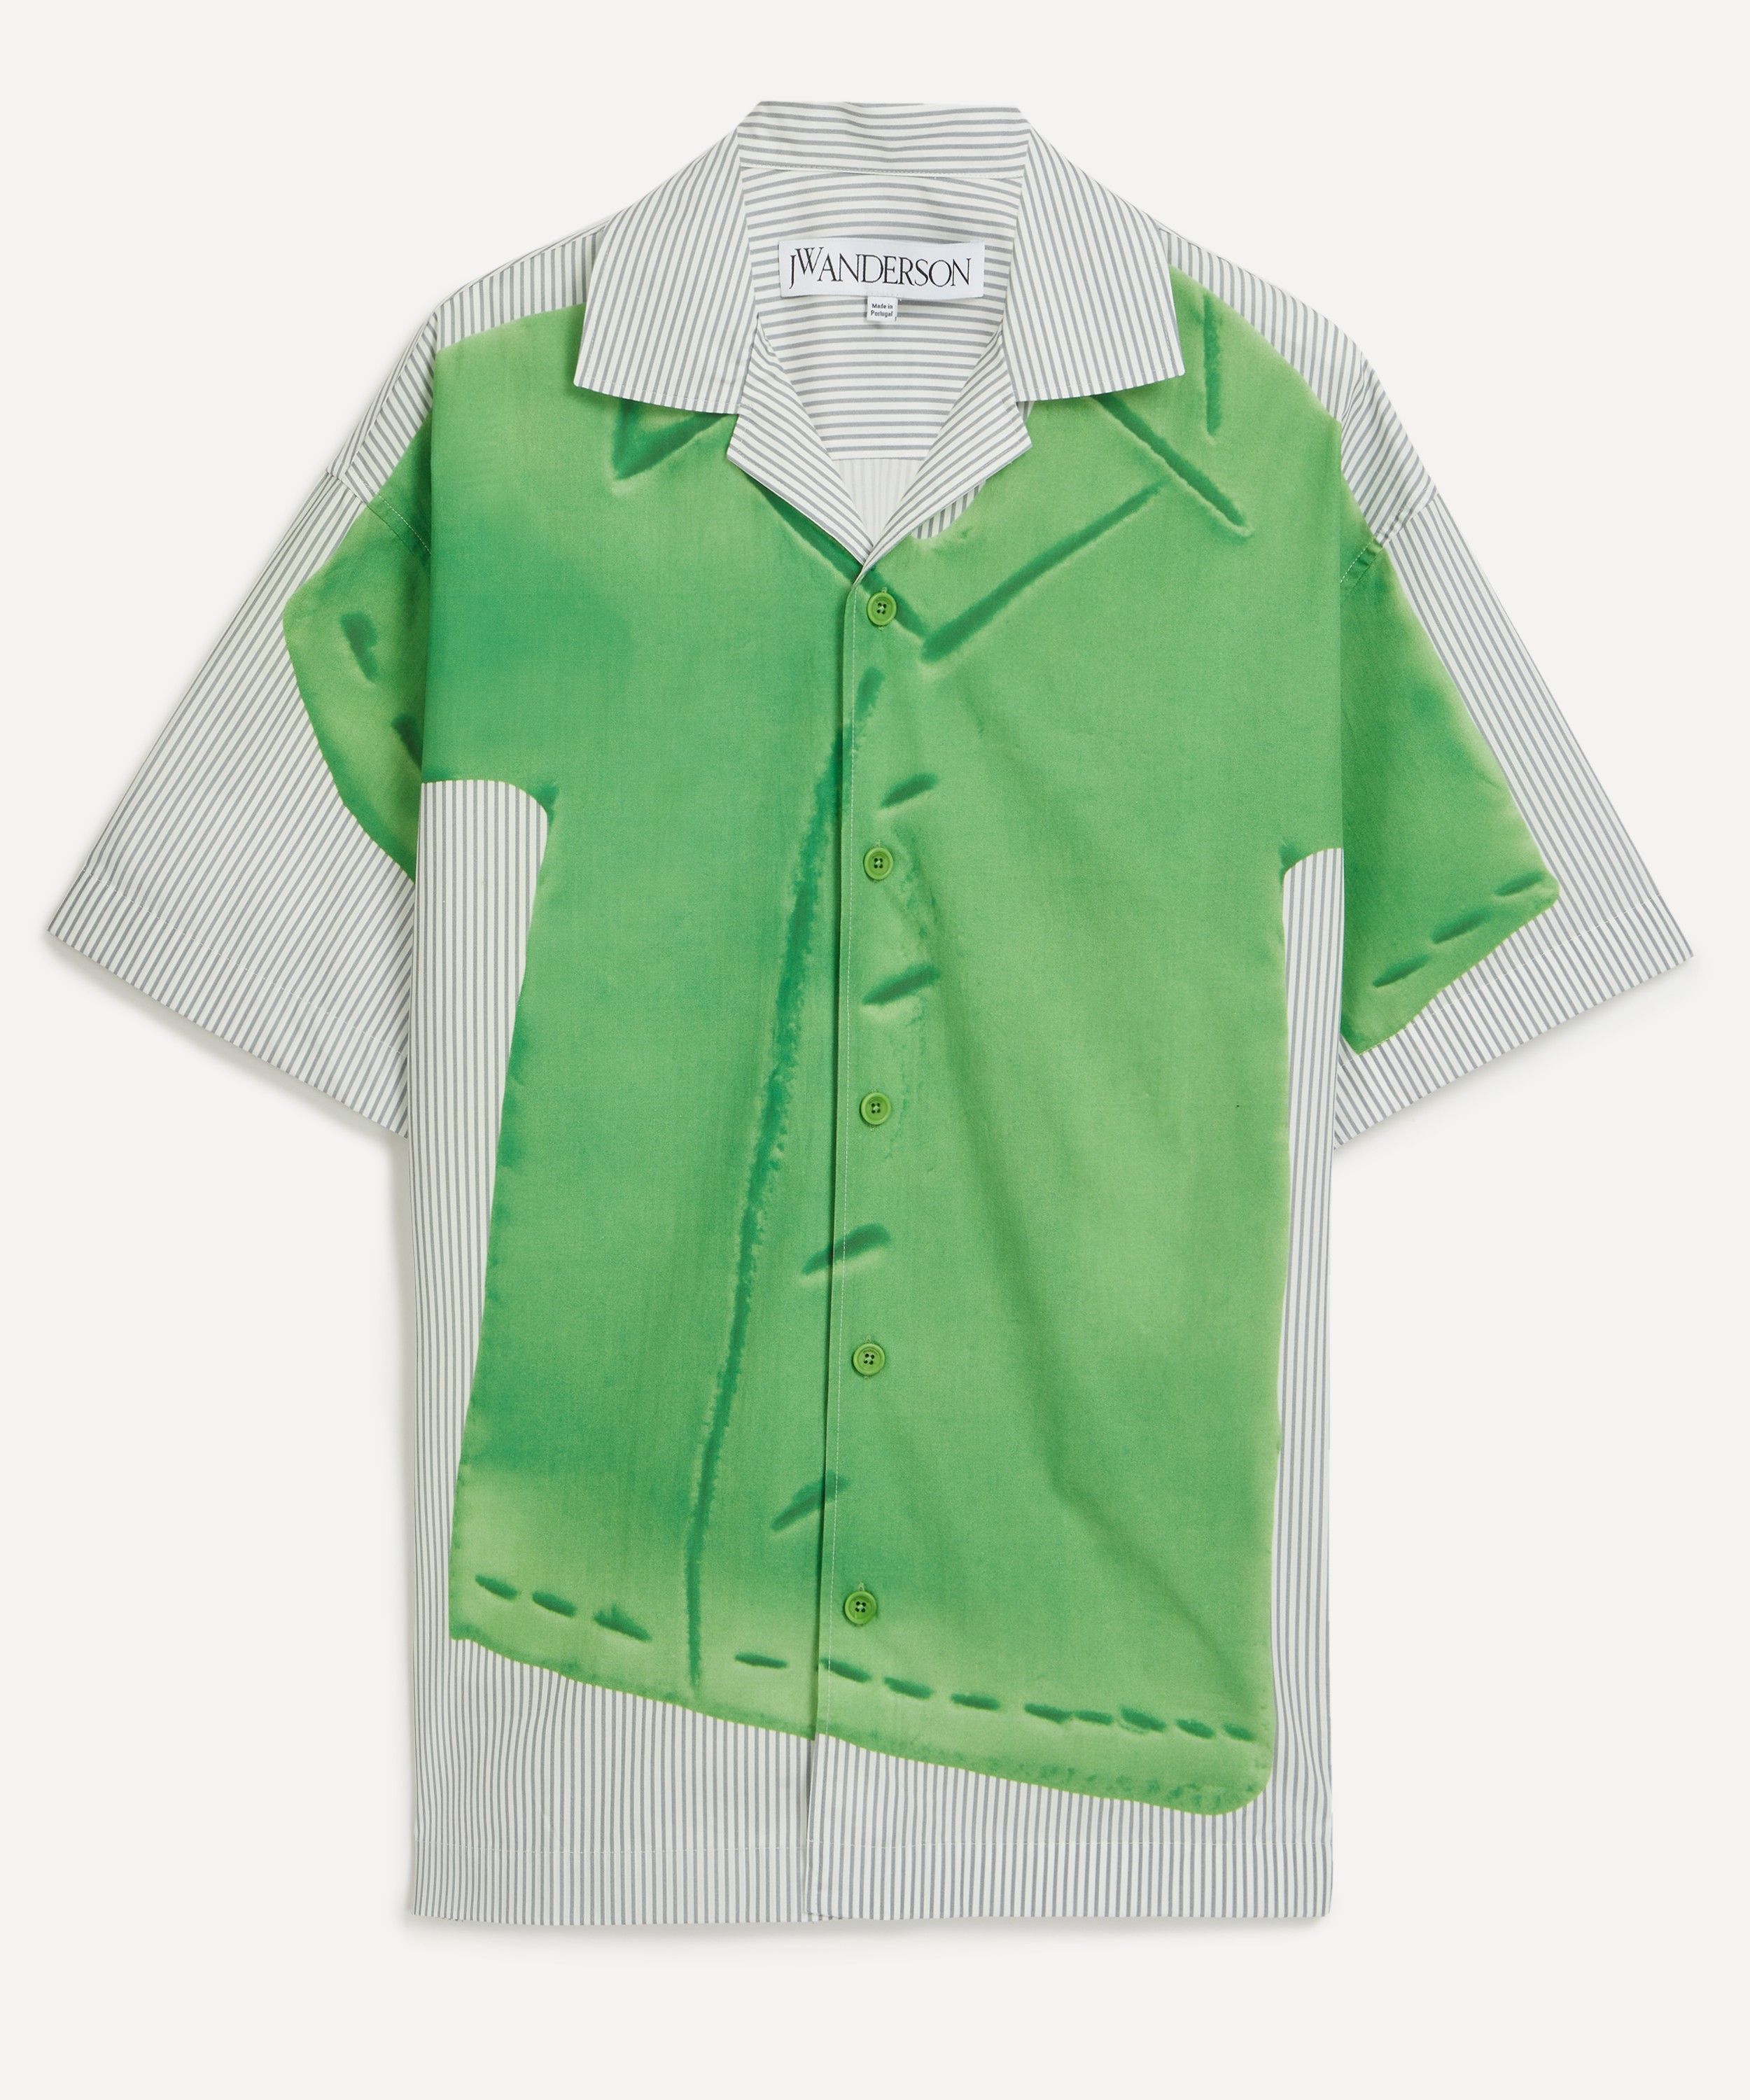 JW Anderson - White and Green Striped Trompe L’Oeil Shirt